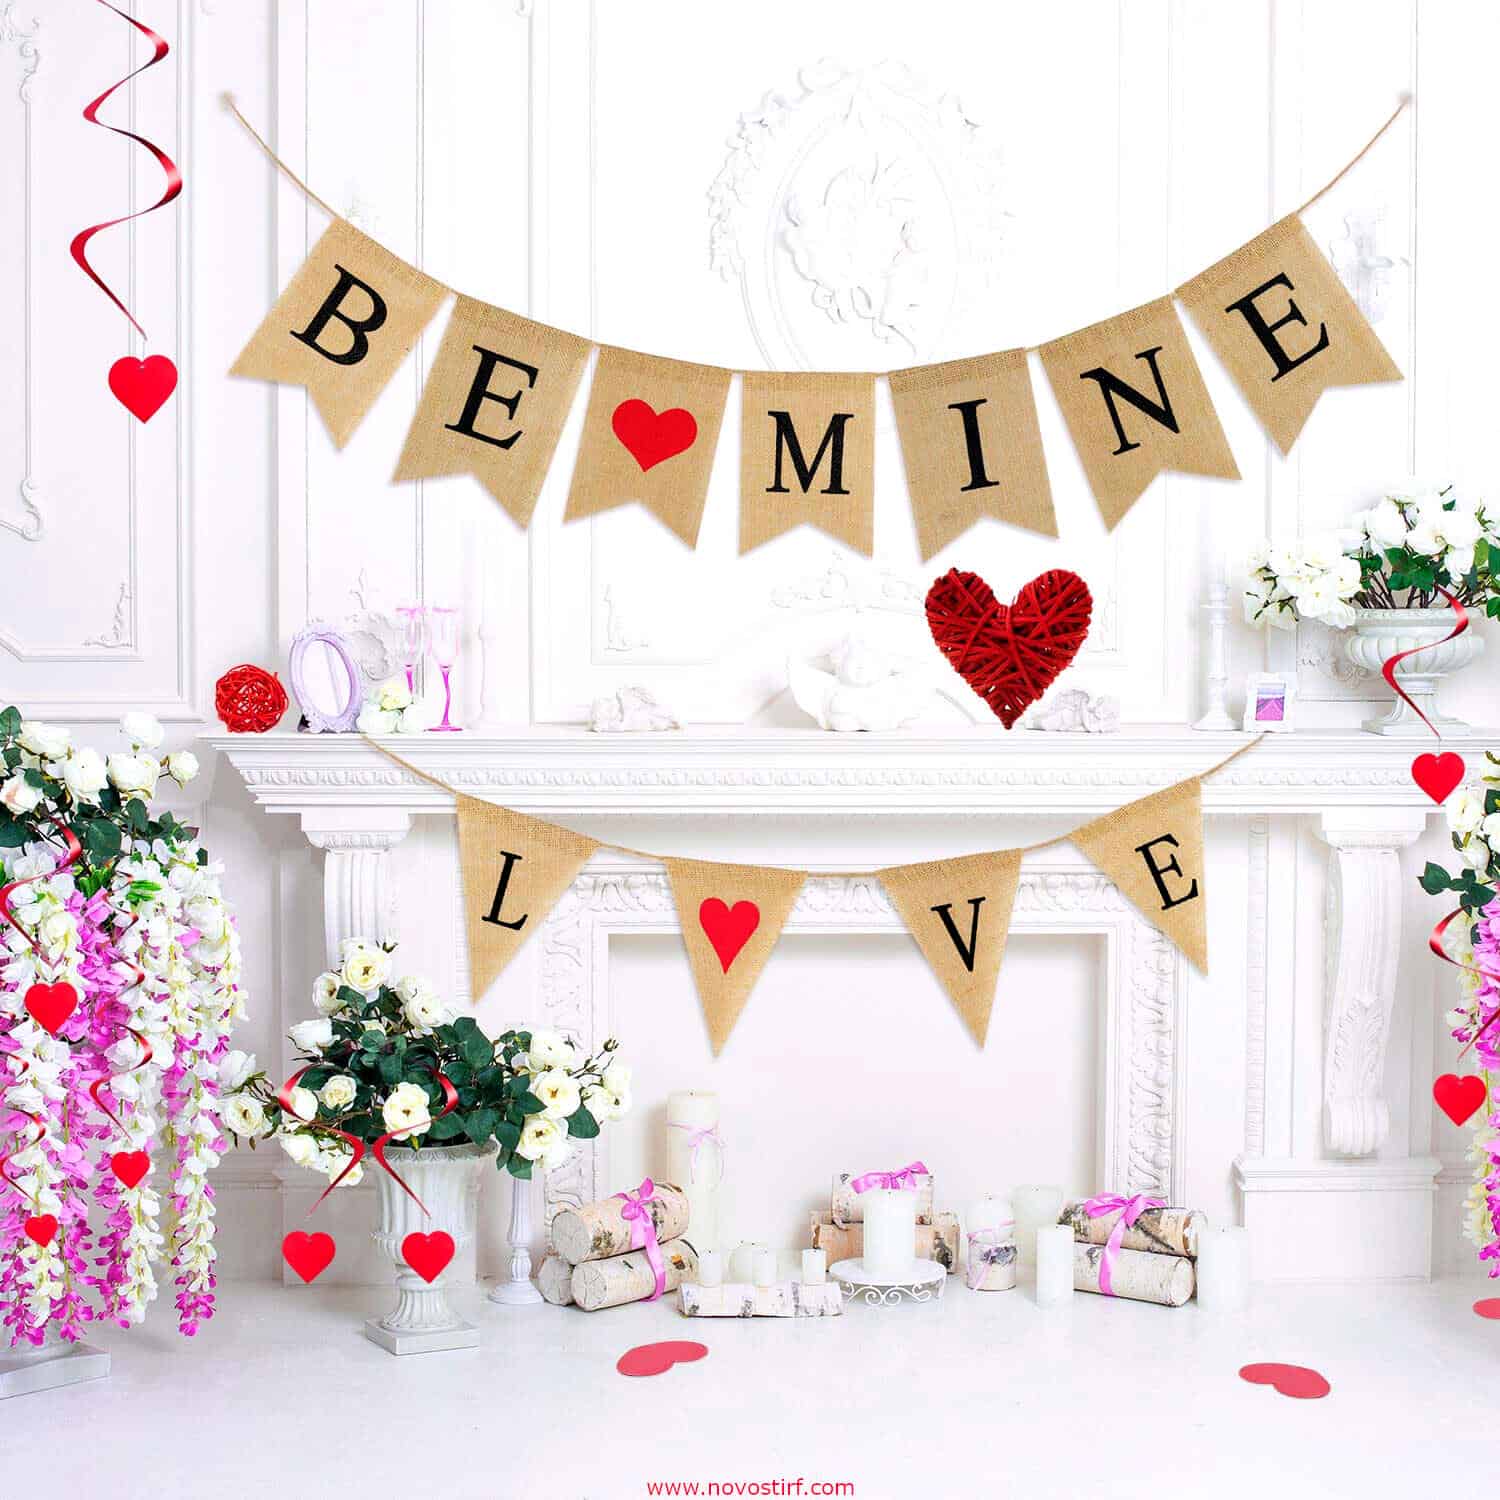 Fabulous 15 Ideas Of Valentines Day Decorations